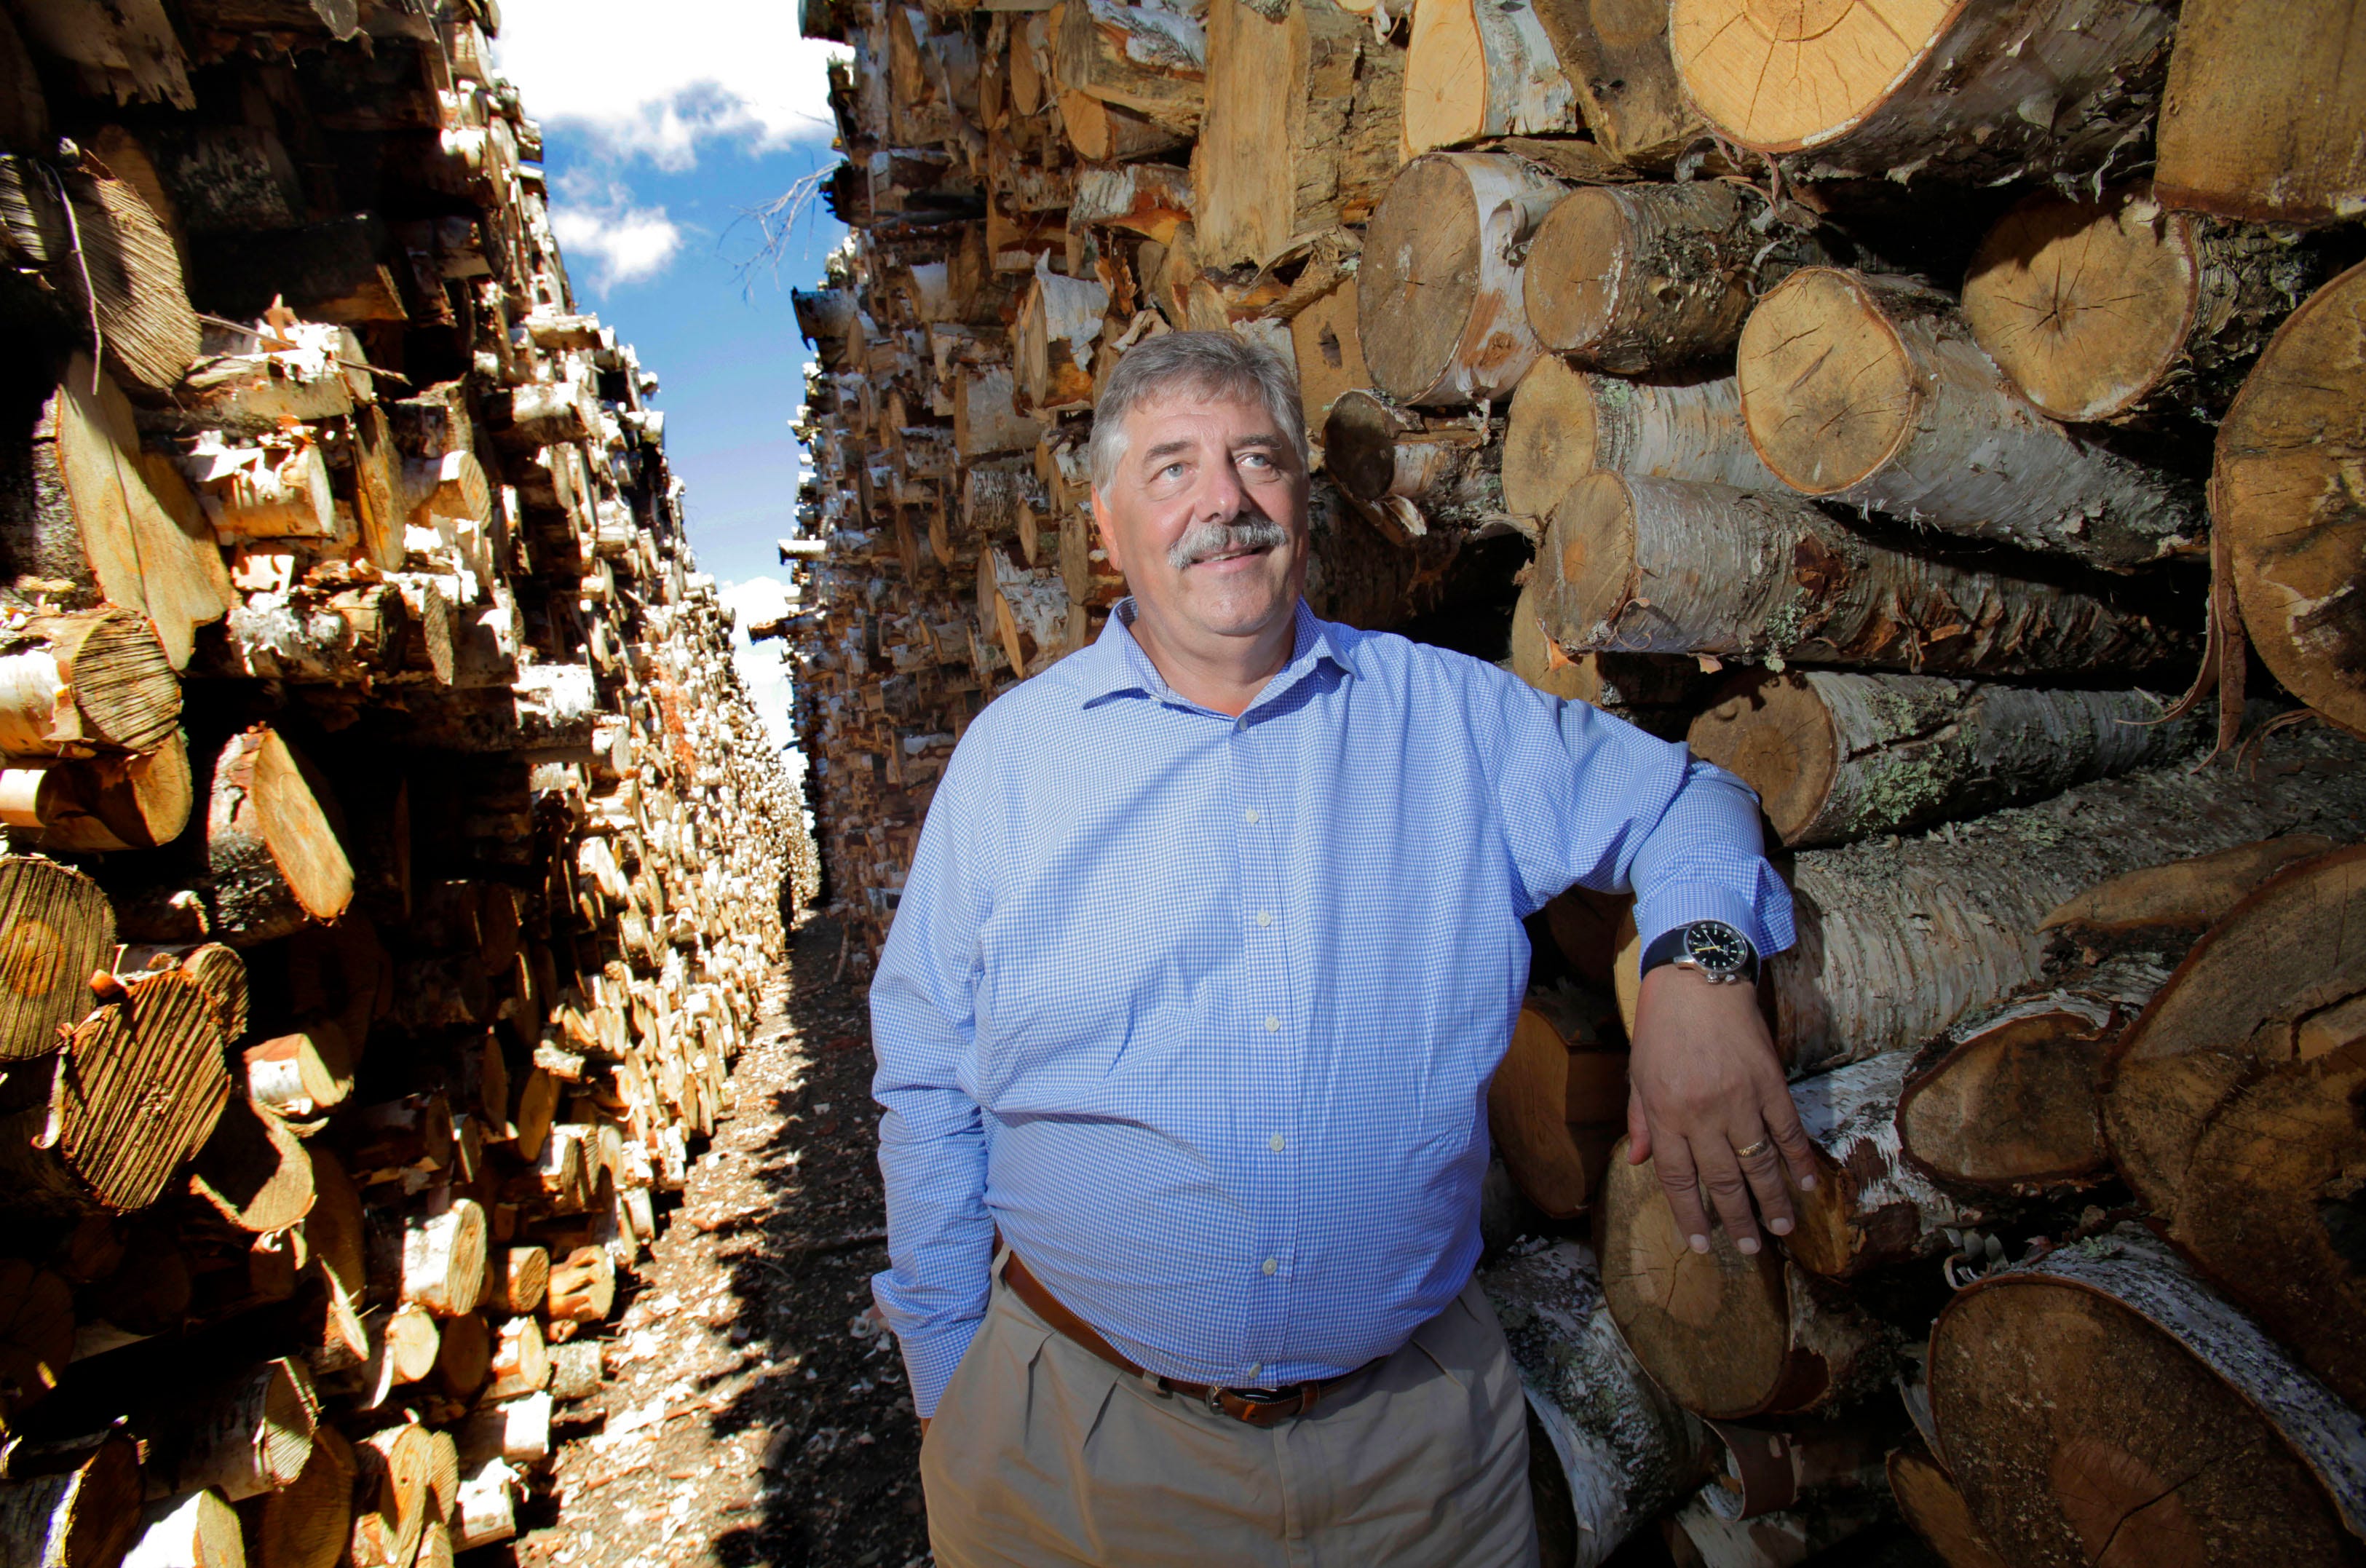 Butch Johnson, CEO of Flambeau River Paper, stands among the rows of cut logs ready to made into paper at the Flambeau River Paper mill in Park Falls, WI. August 7, 2012